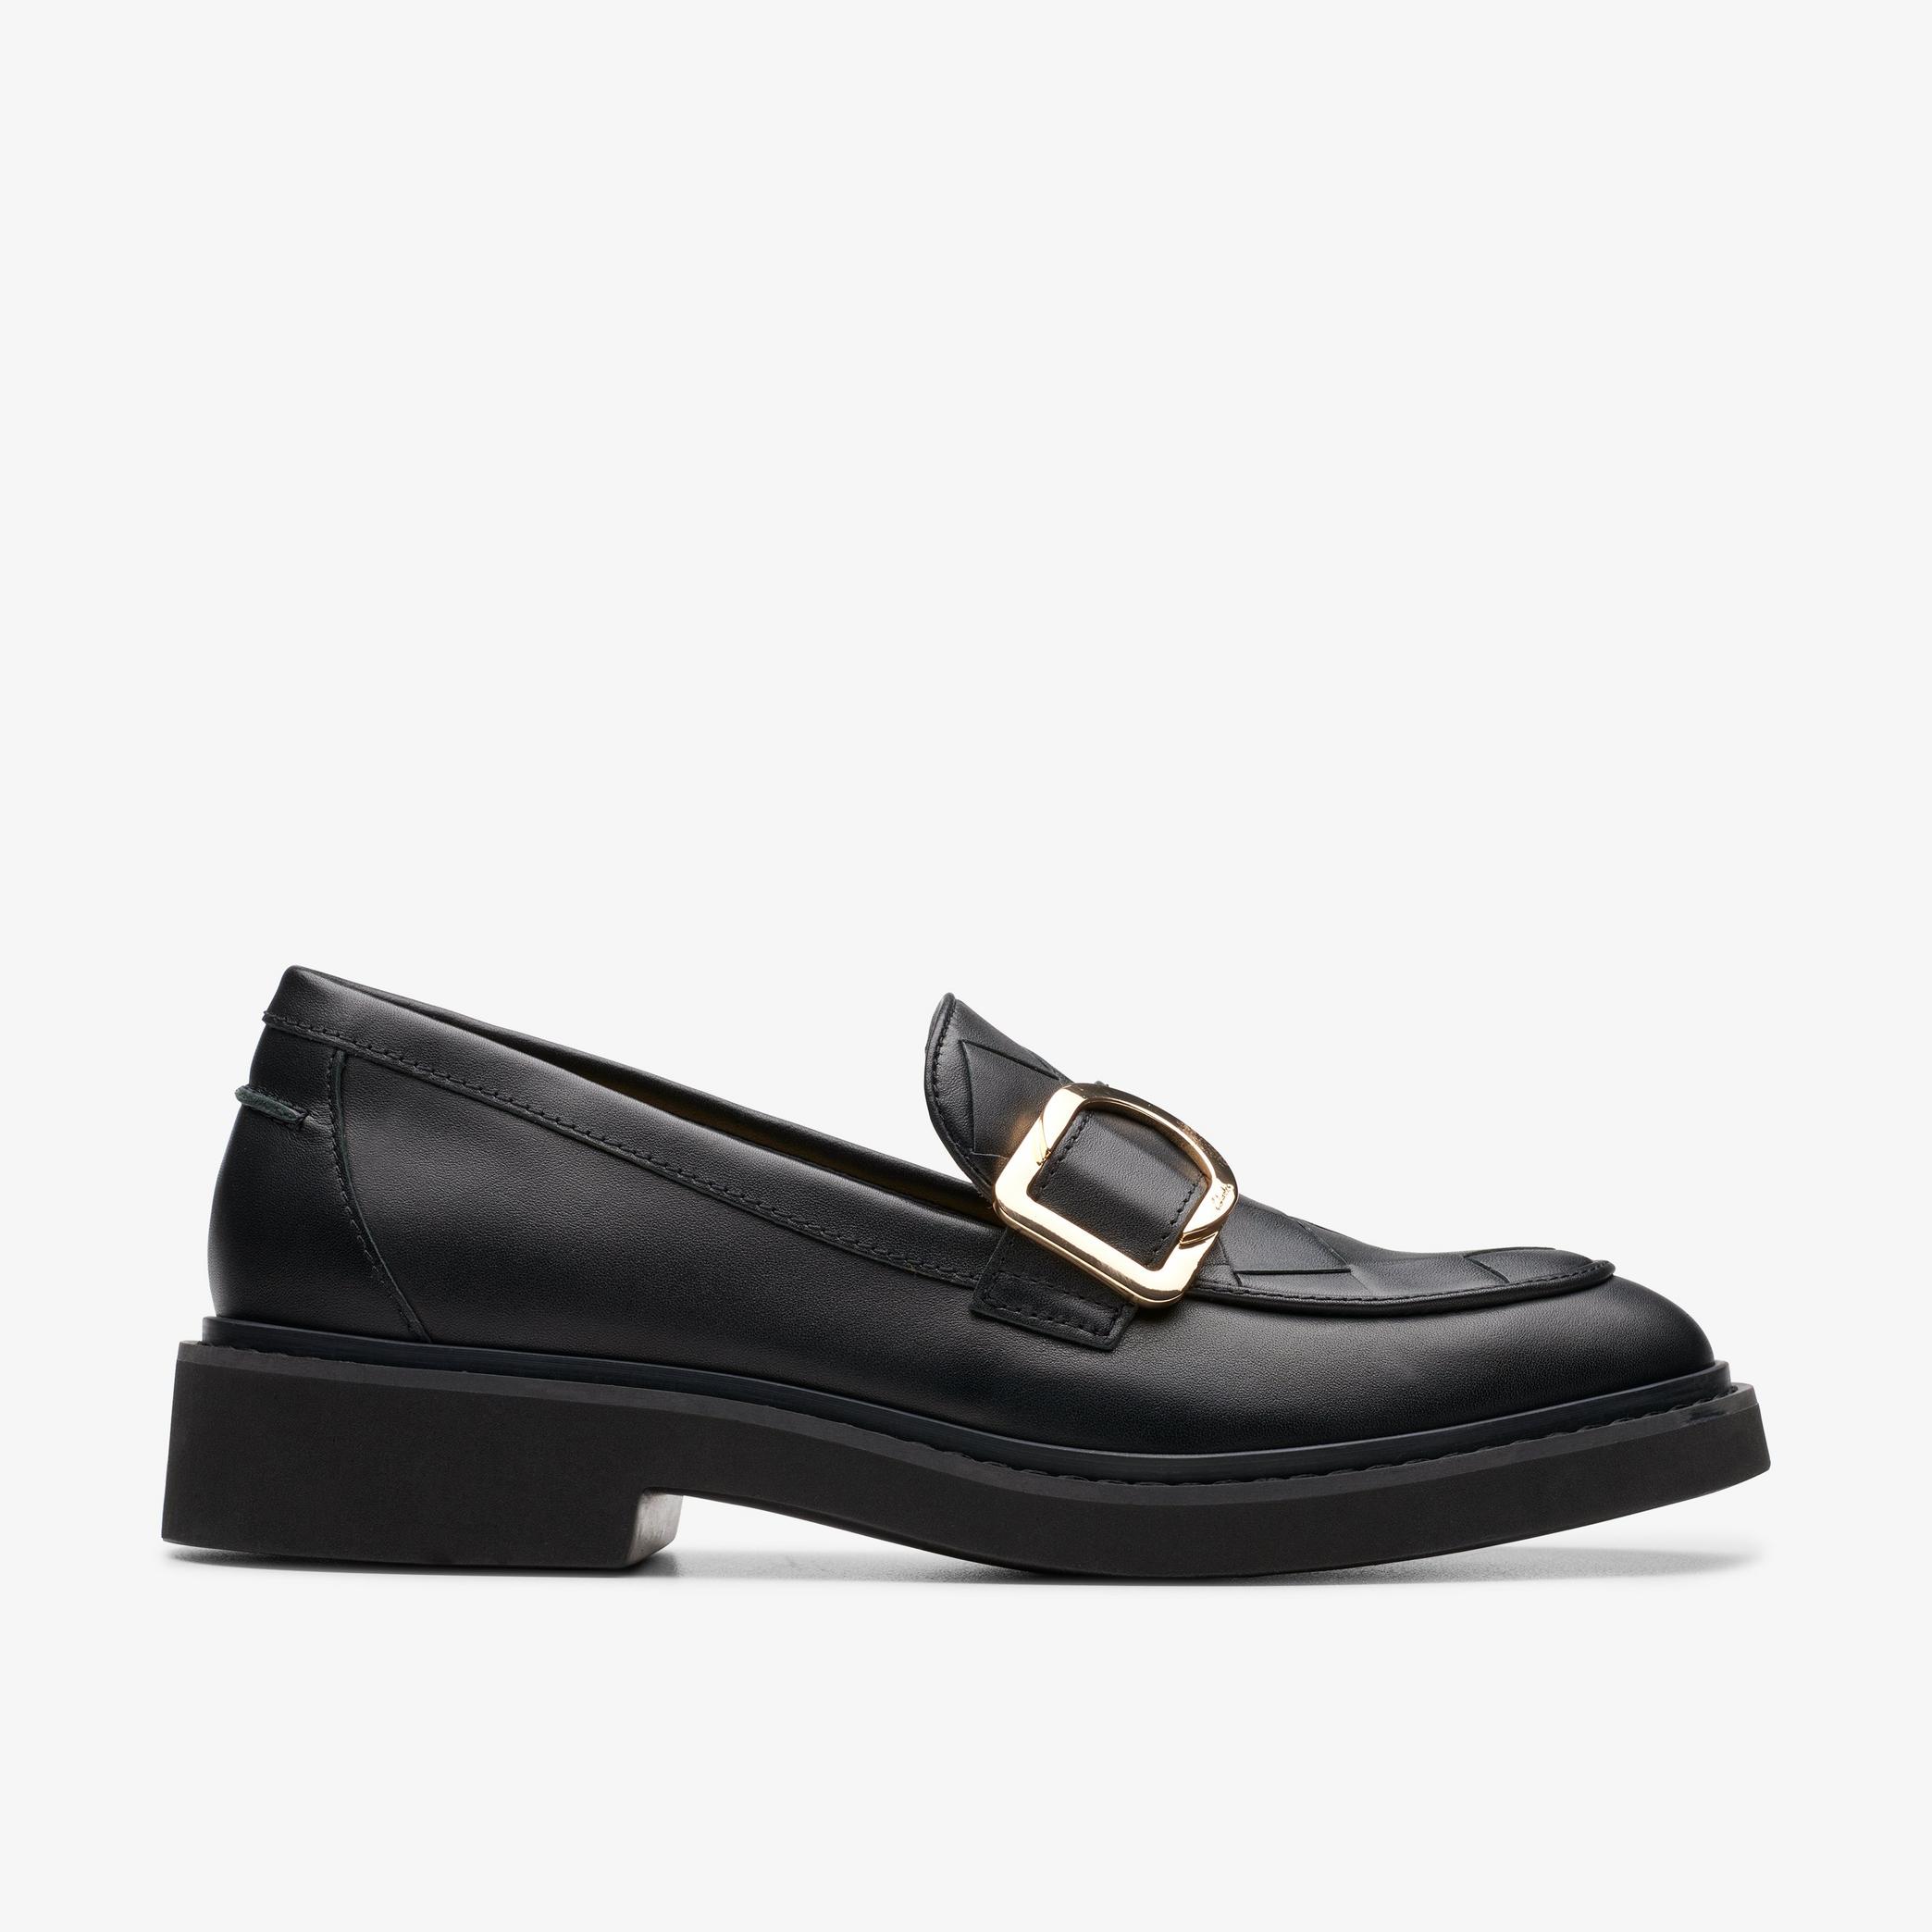 SPLEND PENNY Black Leather Loafers, view 1 of 6